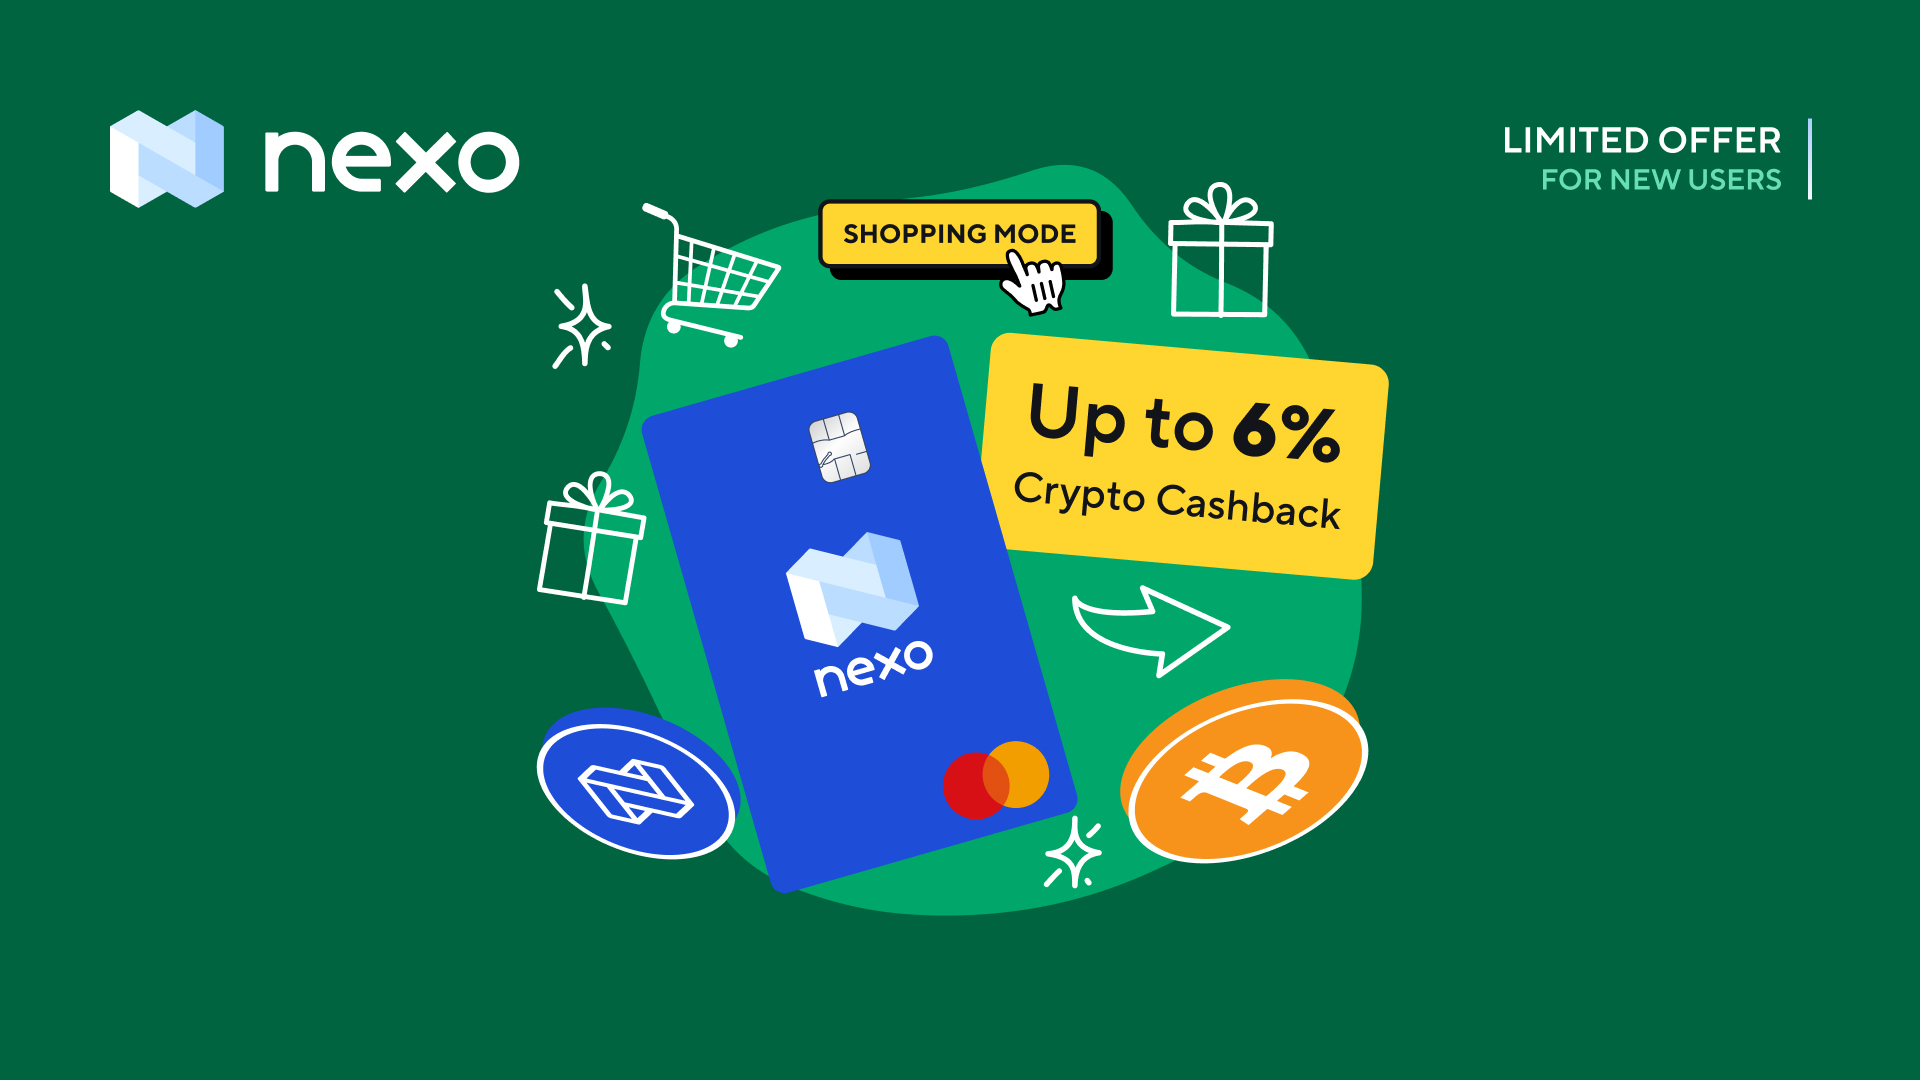 Switch to Shopping Mode with Up to 6% Crypto Cashback